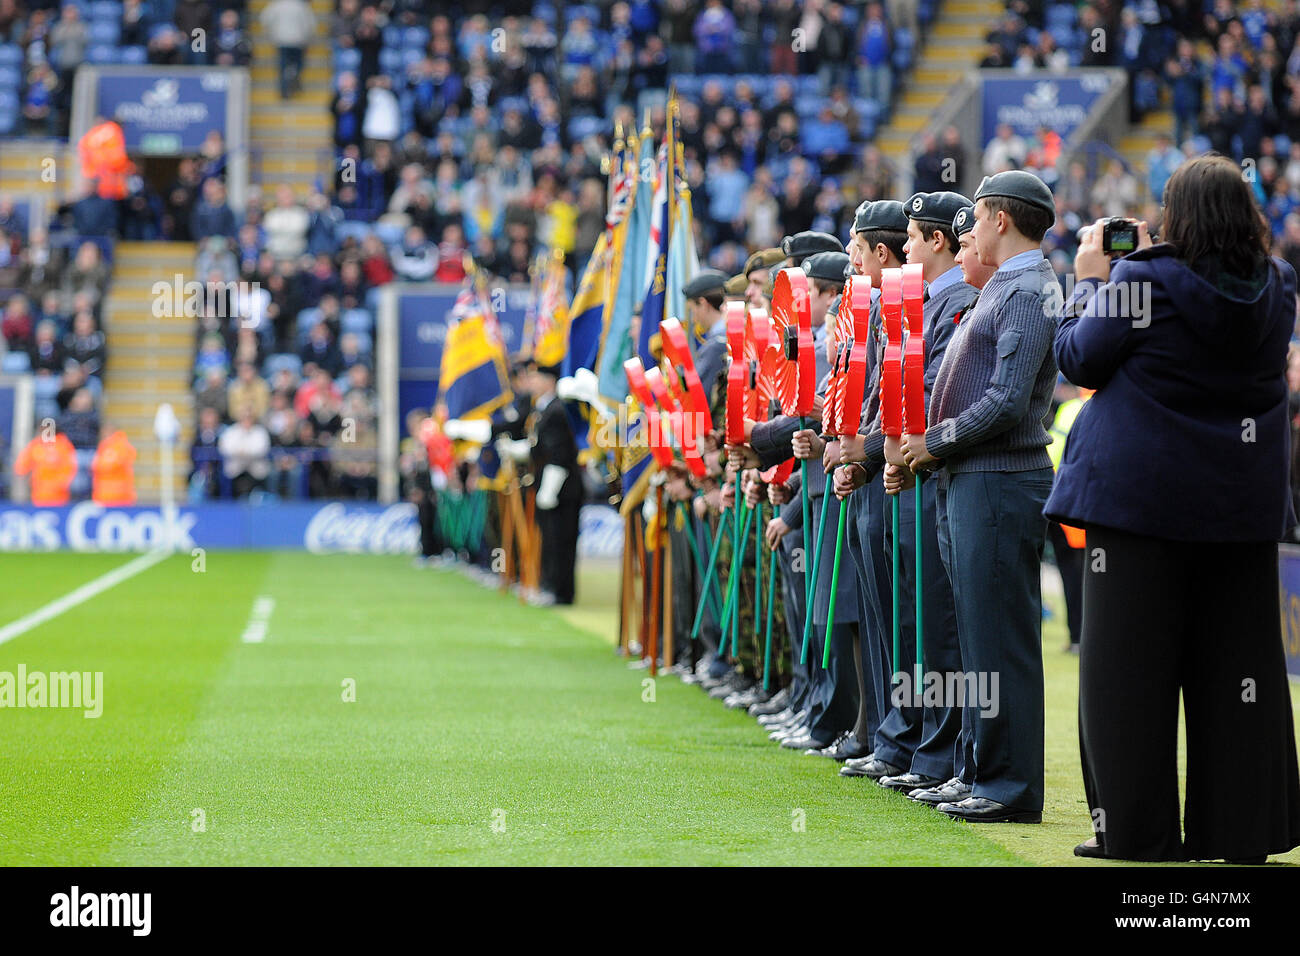 Members of the armed force hold giant poppies in a line inside the King Power Stadium prior to kick-off Stock Photo